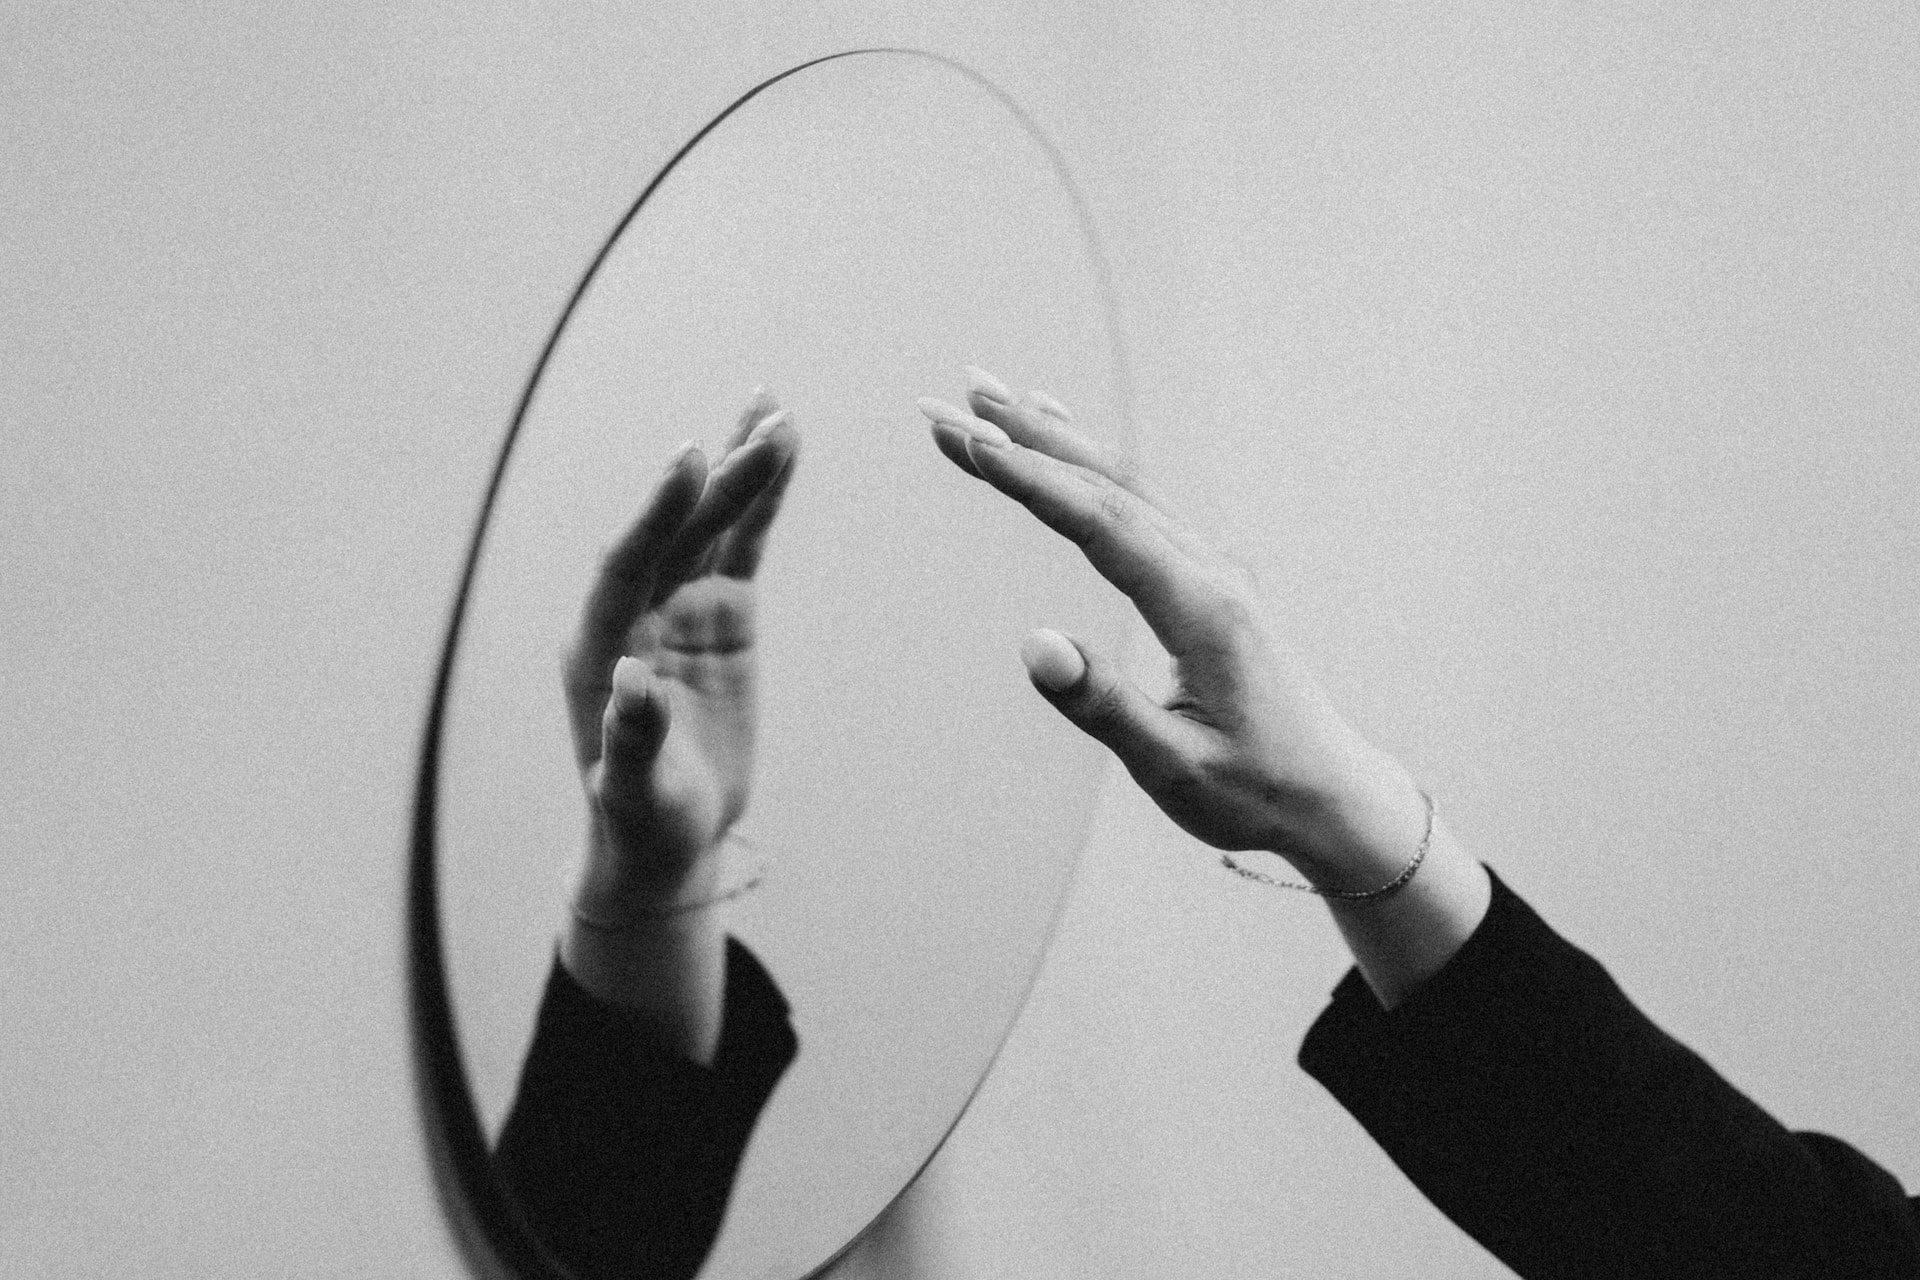 Grayscale image of a person's hand reaching towards a circular mirror, creating a reflection. The person appears to be wearing a dark long-sleeved garment and a thin bracelet on their wrist. The background is a plain, textured wall, evoking the introspection common in mental health treatment settings.